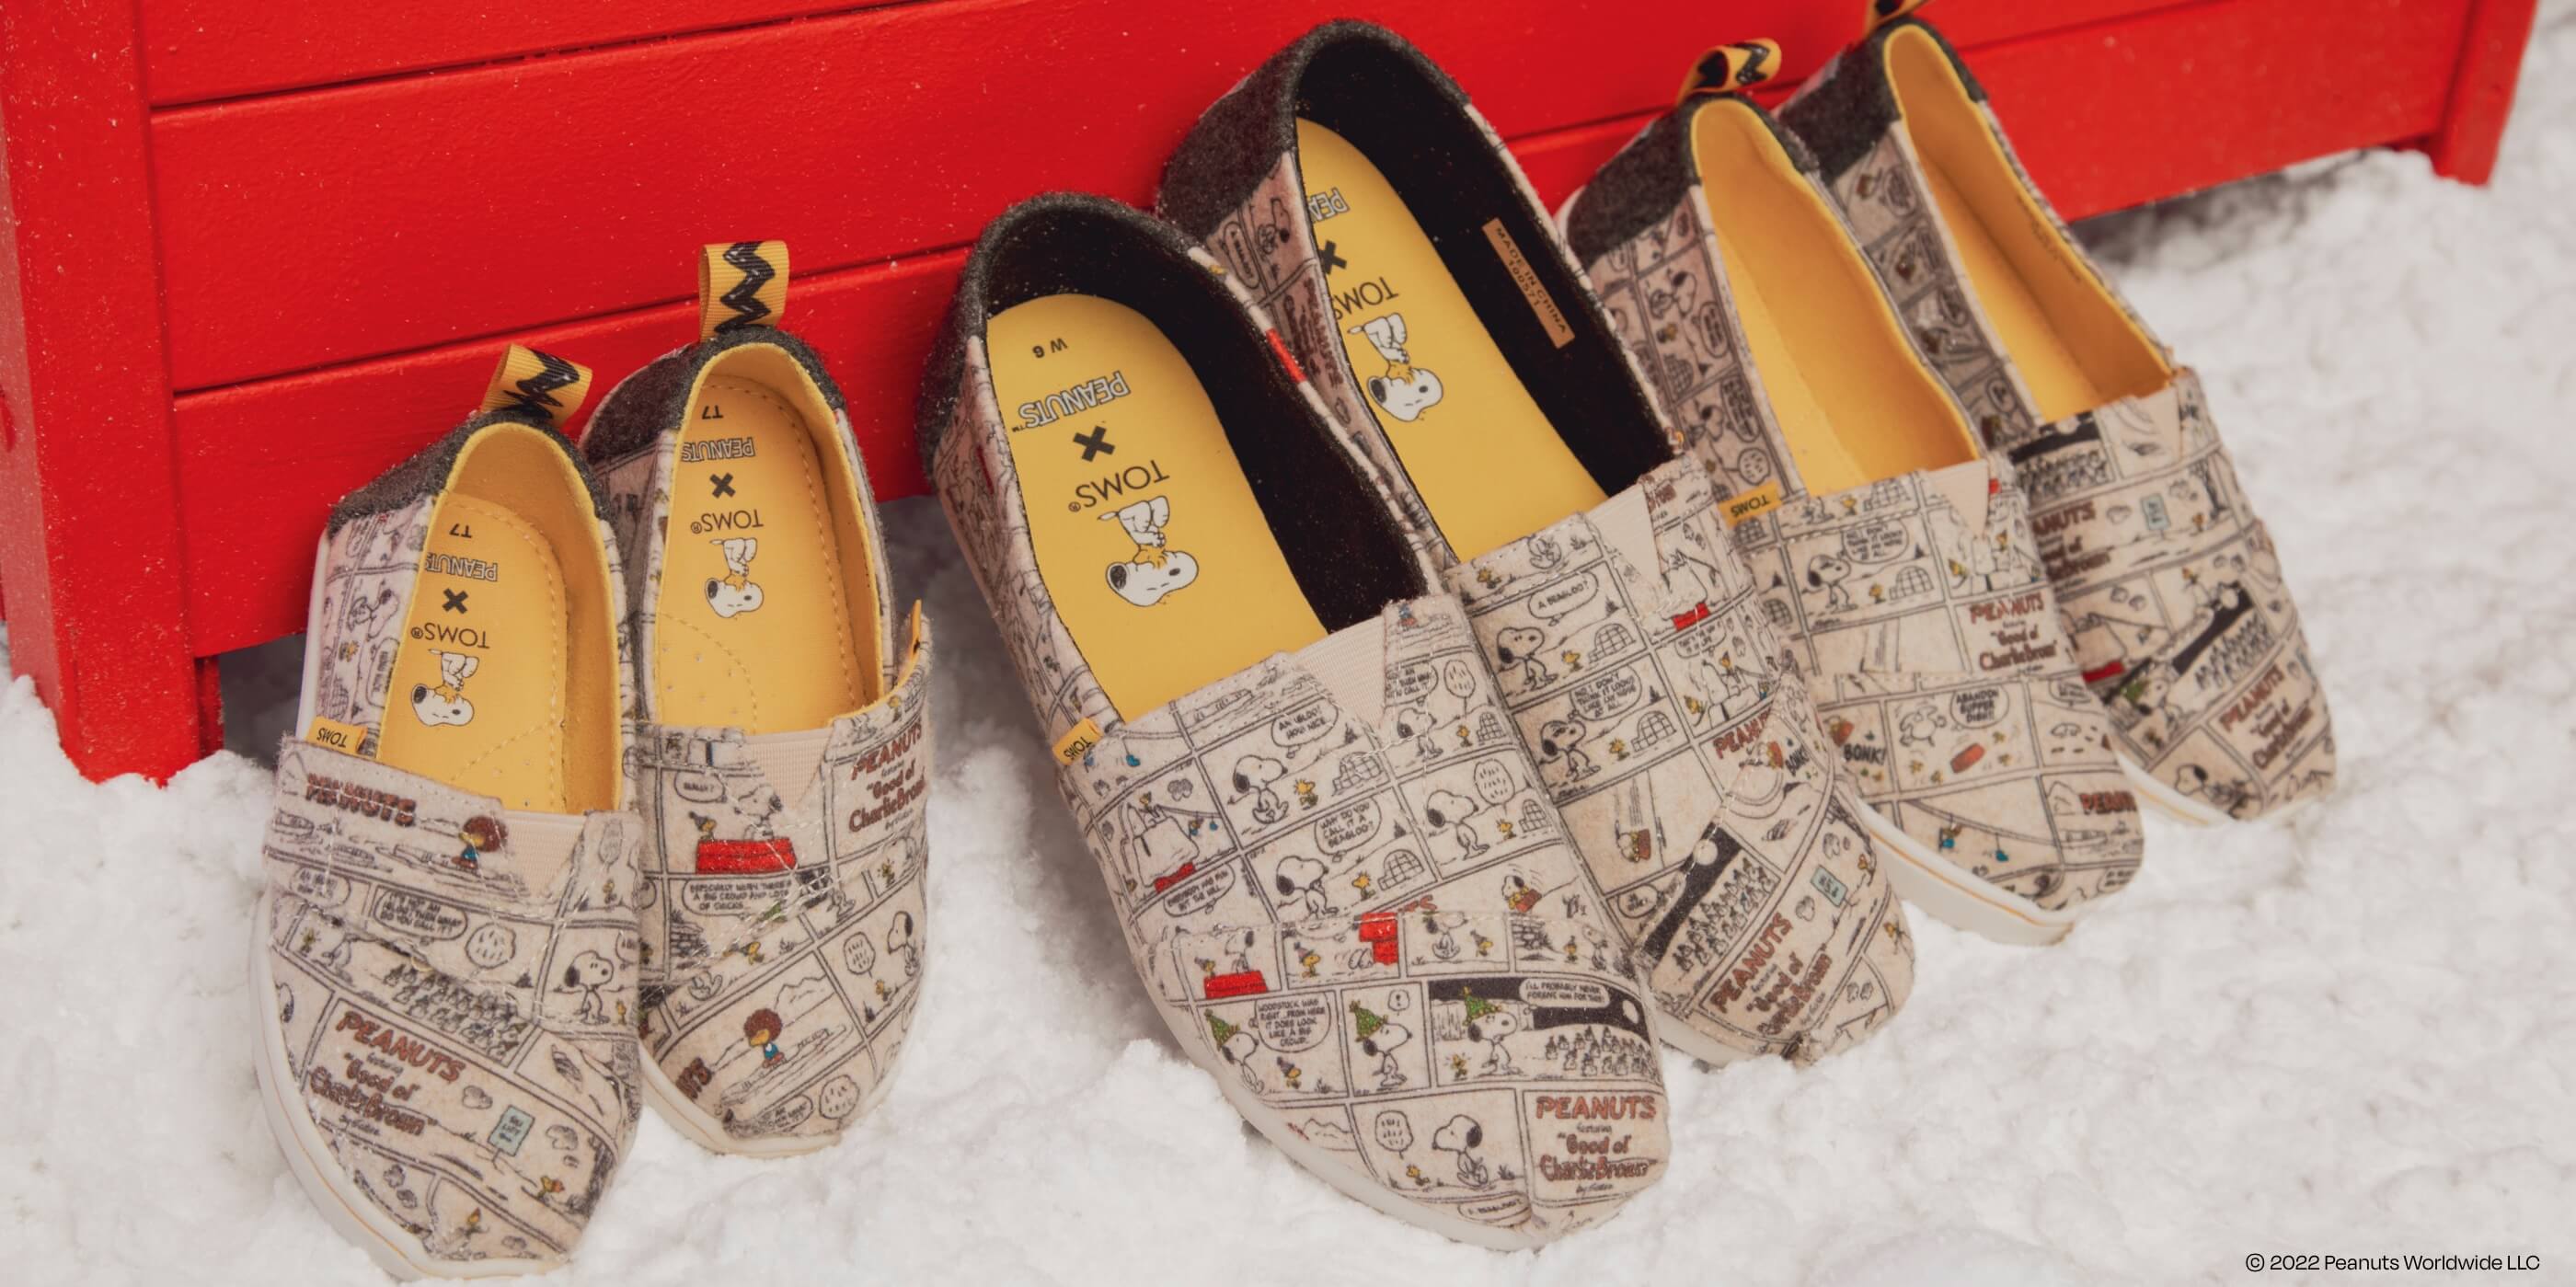 Women's, Youth, and Tiny TOMS X PEANUTS Espadrille Alpargatas featuring Snoopy and Woodstock shown.